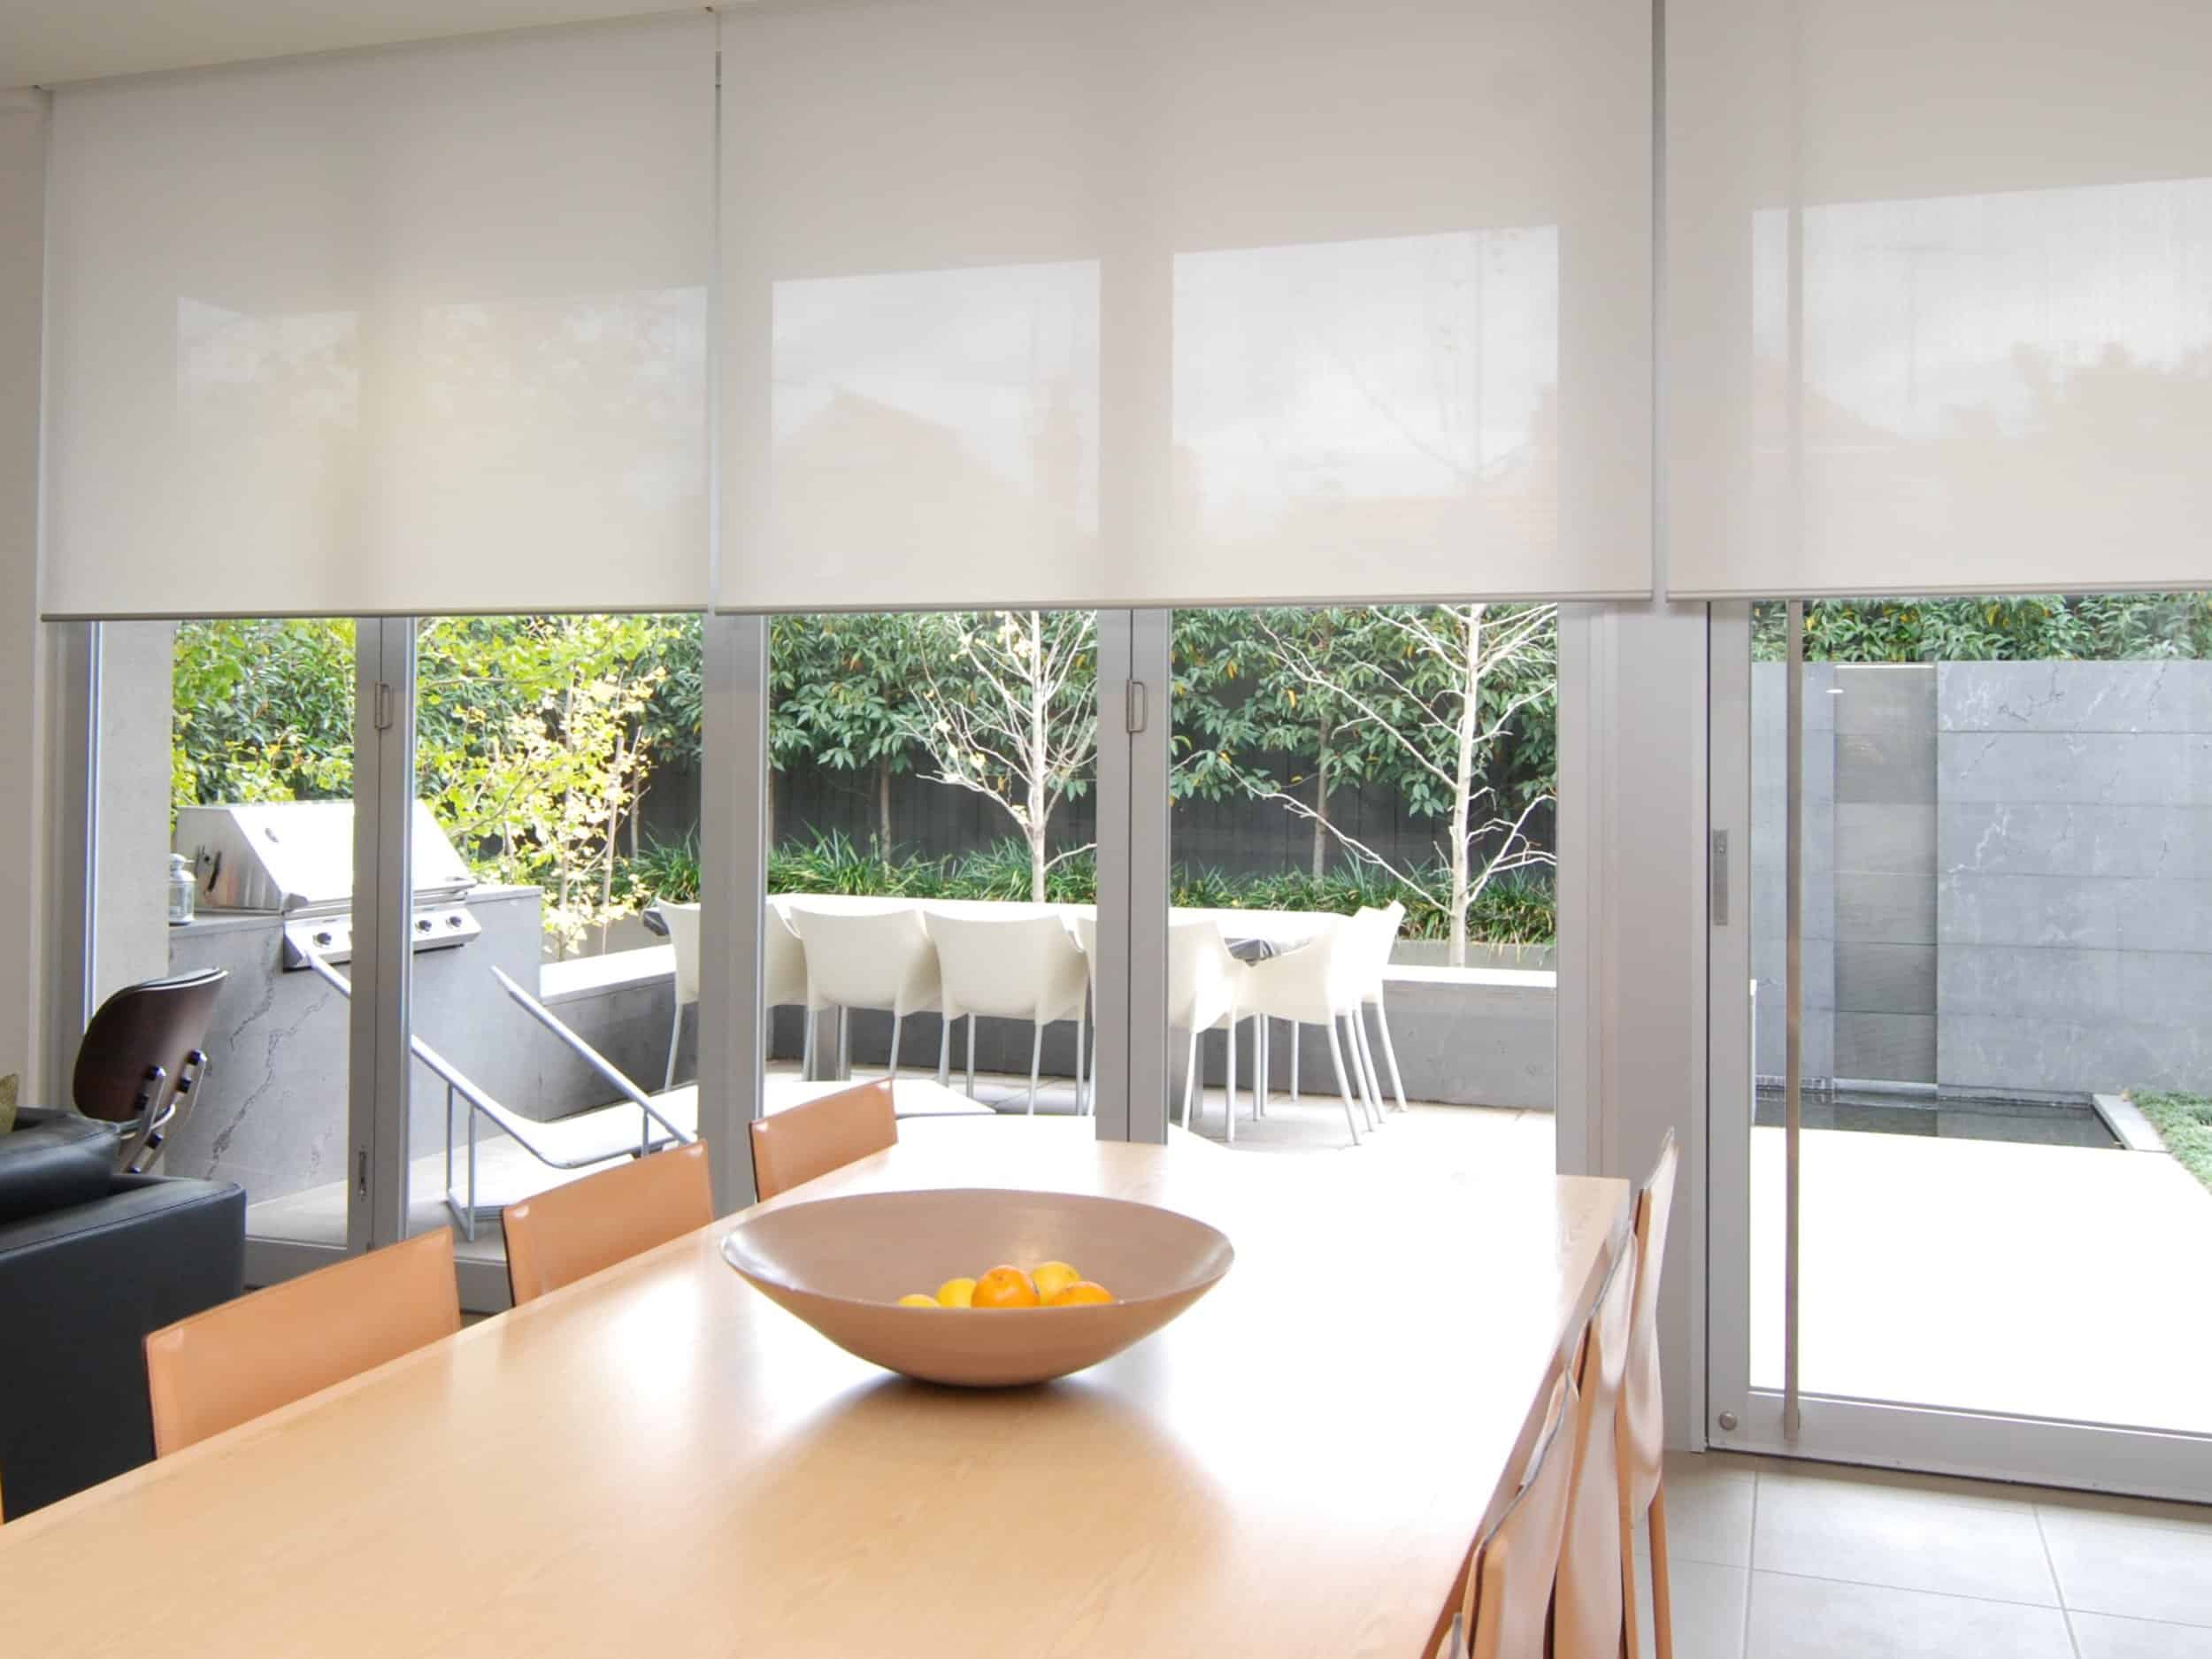 Benefits of window dressing - A dining room protected from the harsh outdoors with window dressings